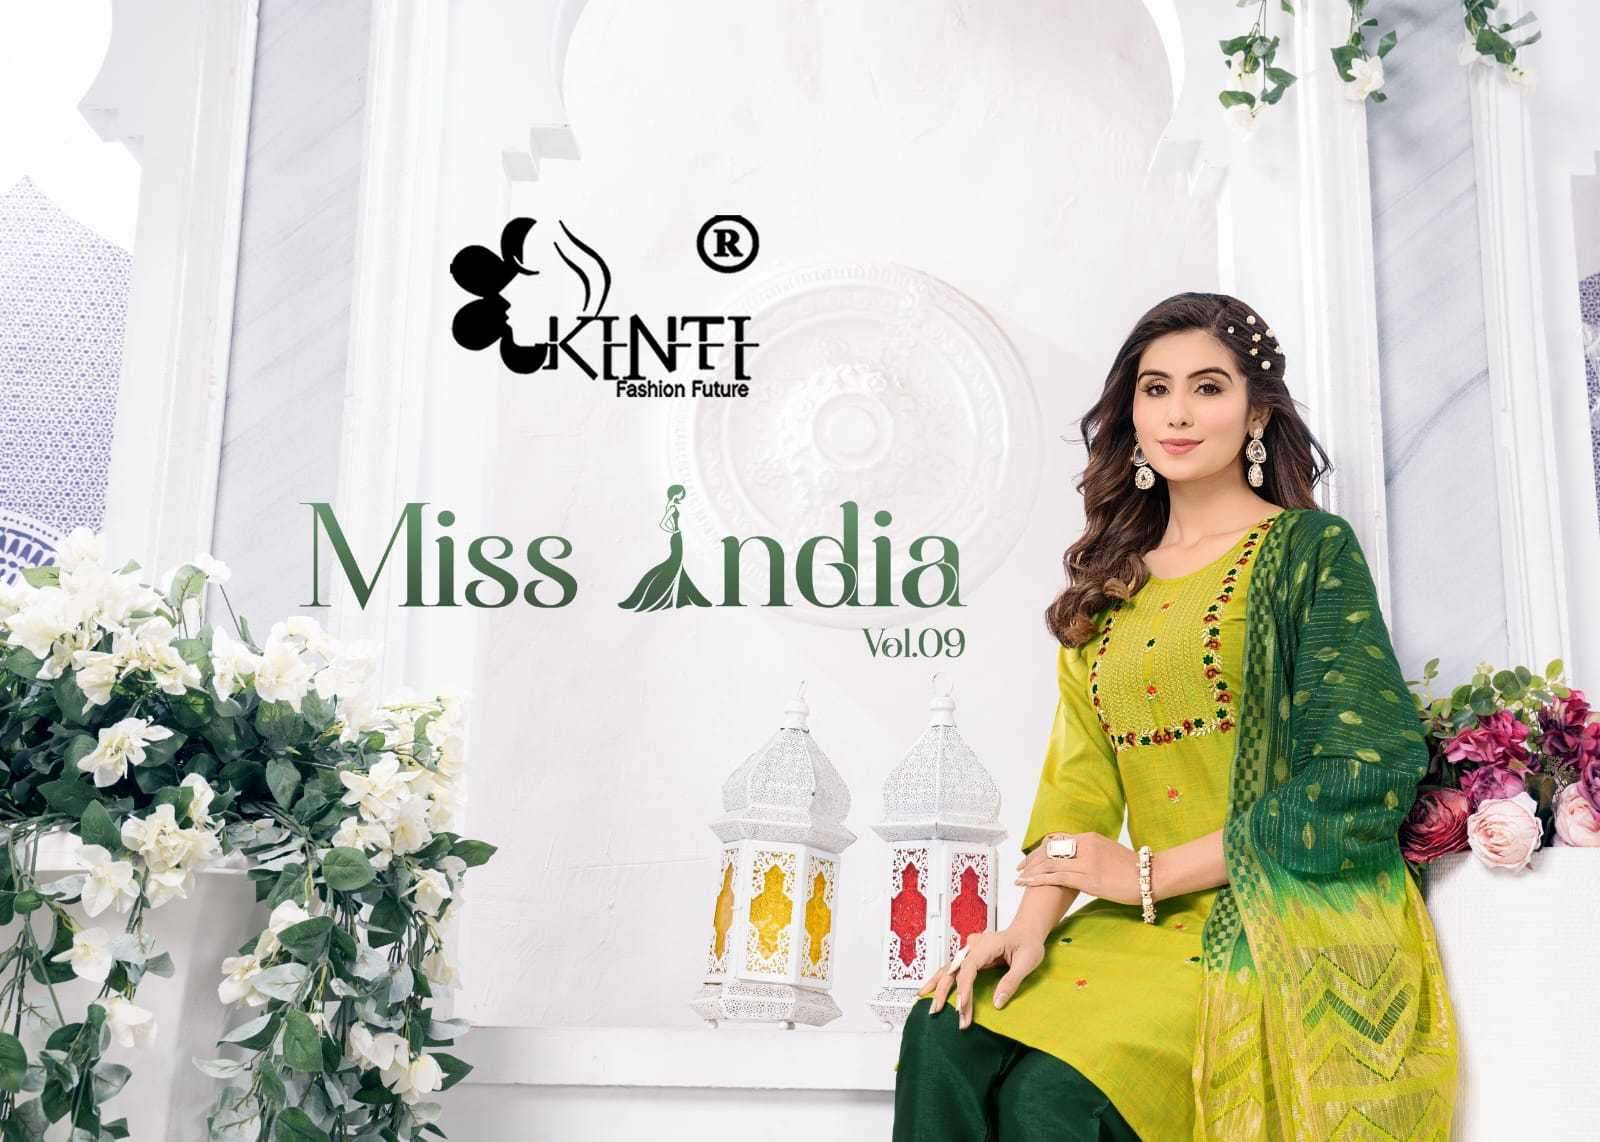 kinti miss india vol 9 series 901-908 Two Tone Rayon readymade suit 